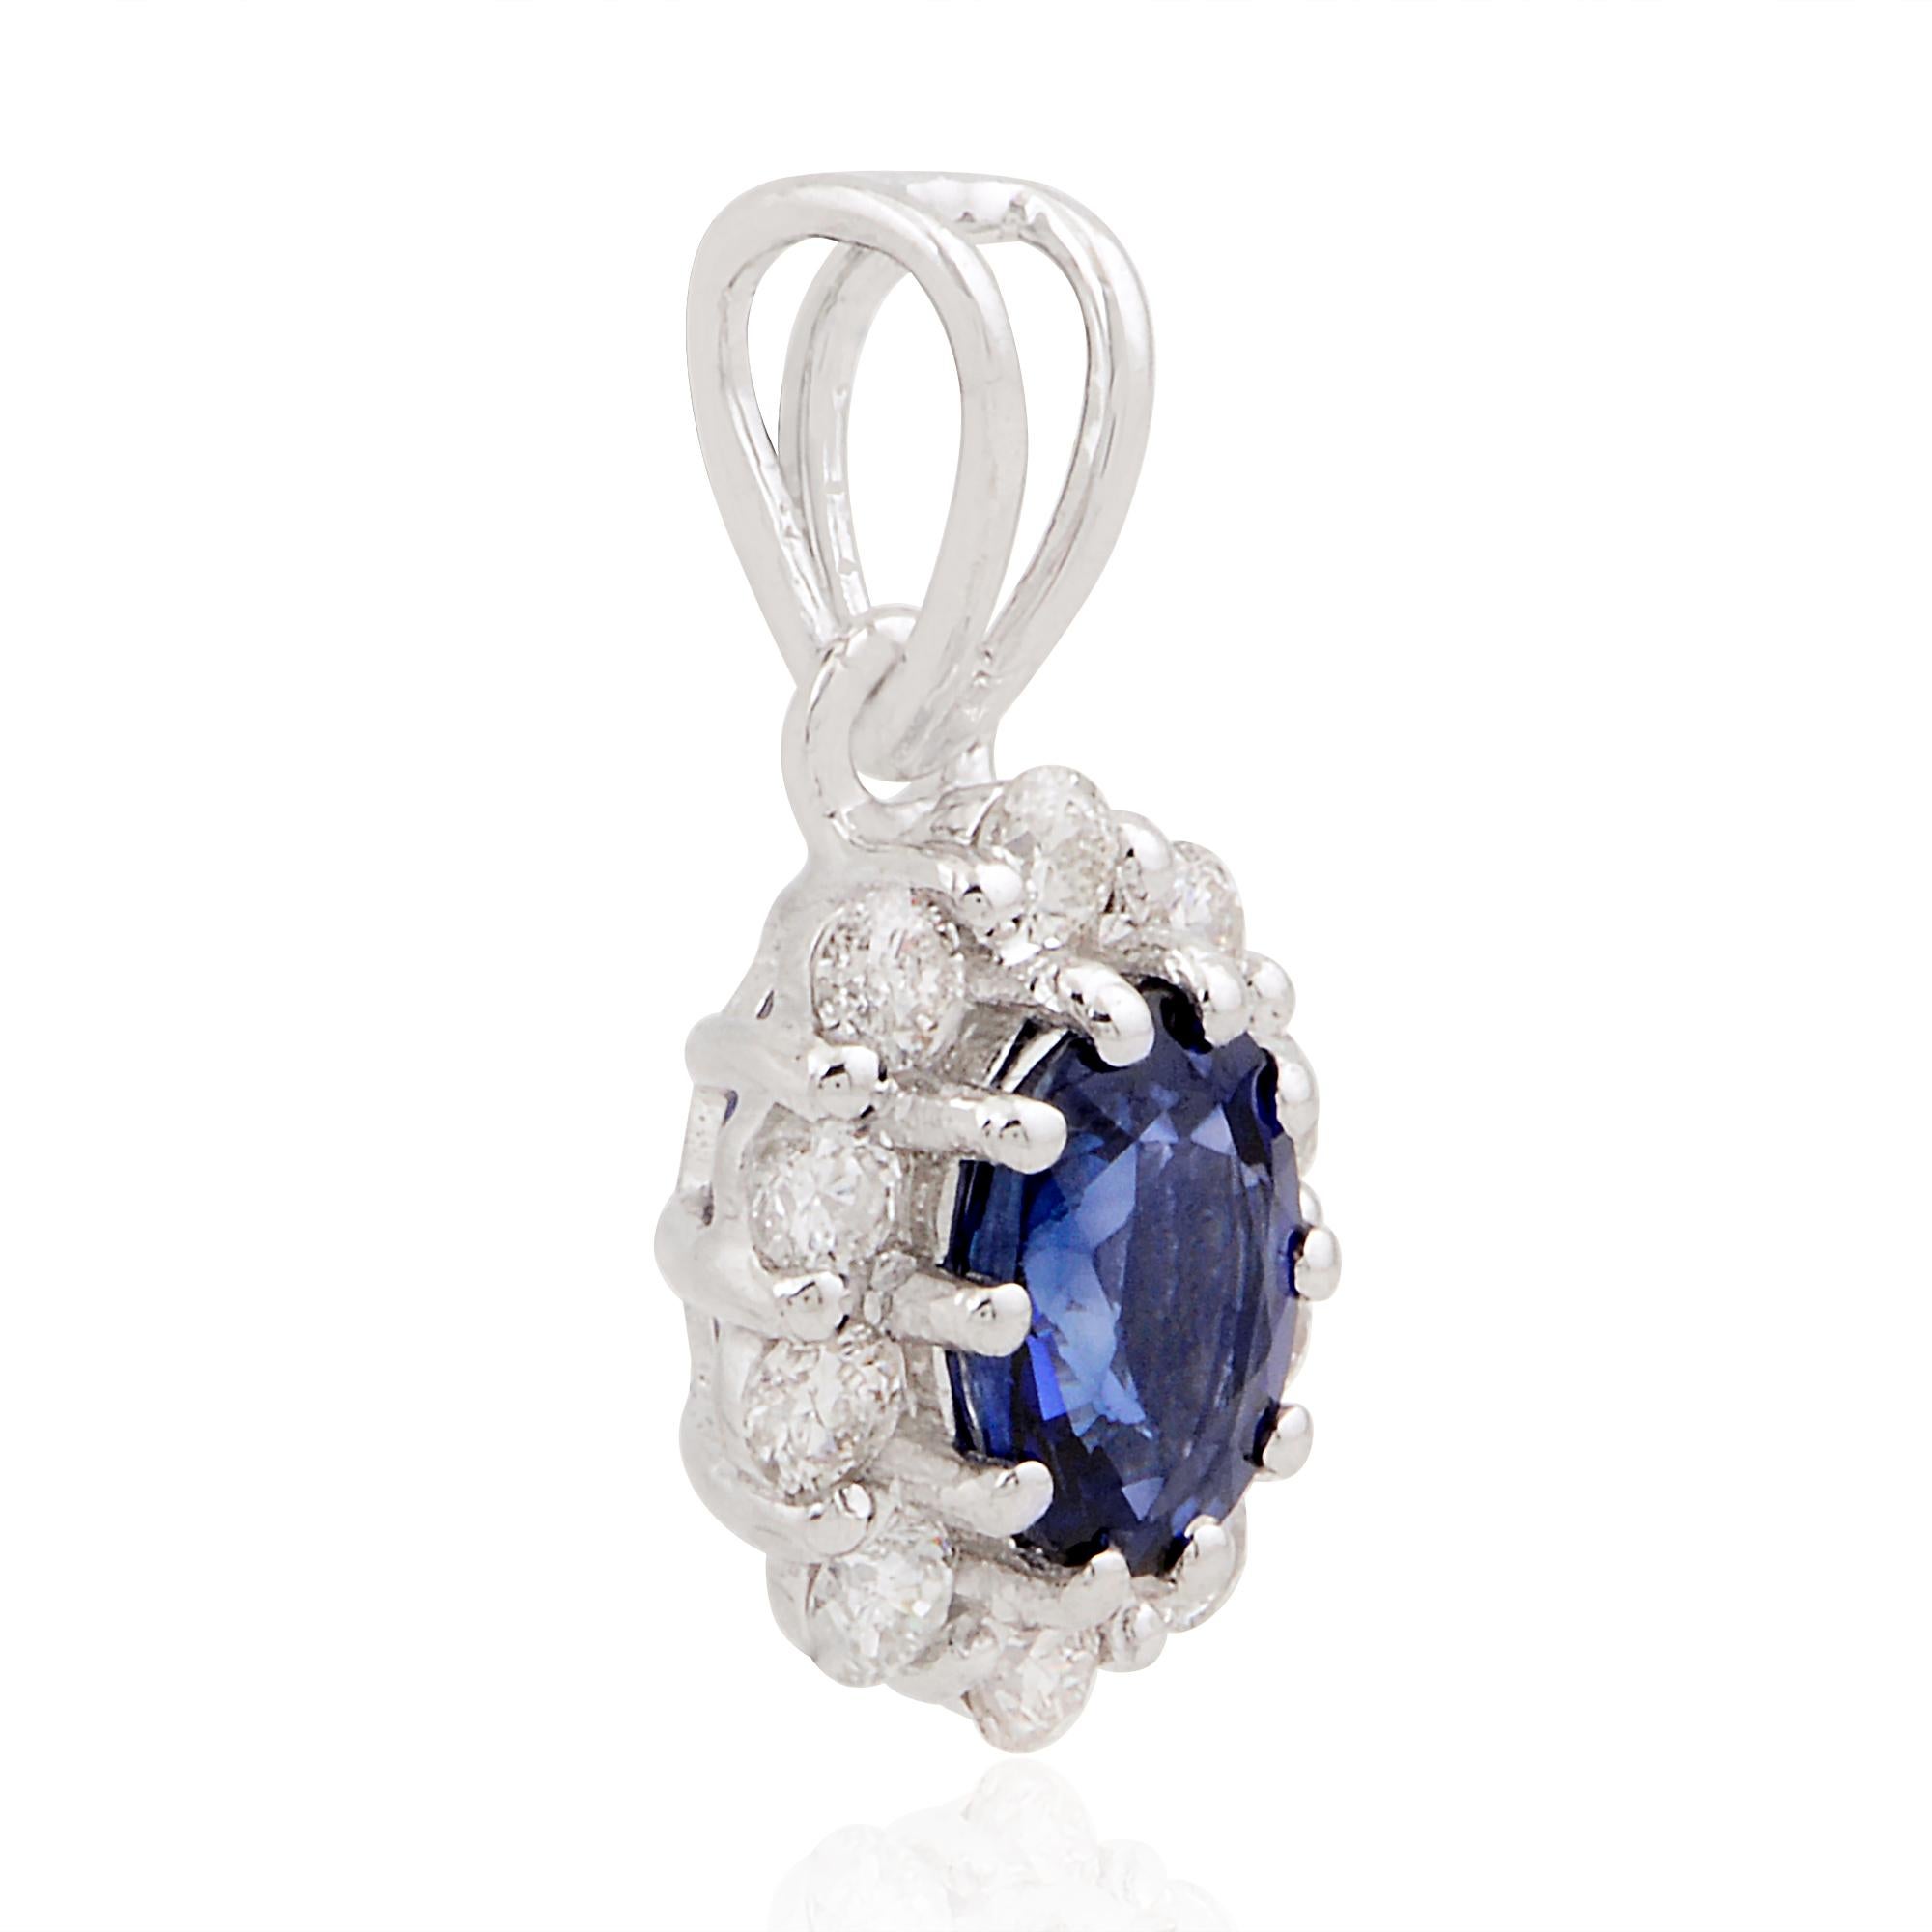 This Natural Oval Blue Sapphire Charm Pendant is a versatile piece that can be worn for any occasion. It adds a pop of color and elegance to both casual and formal outfits, making it a perfect choice for everyday wear or special events.